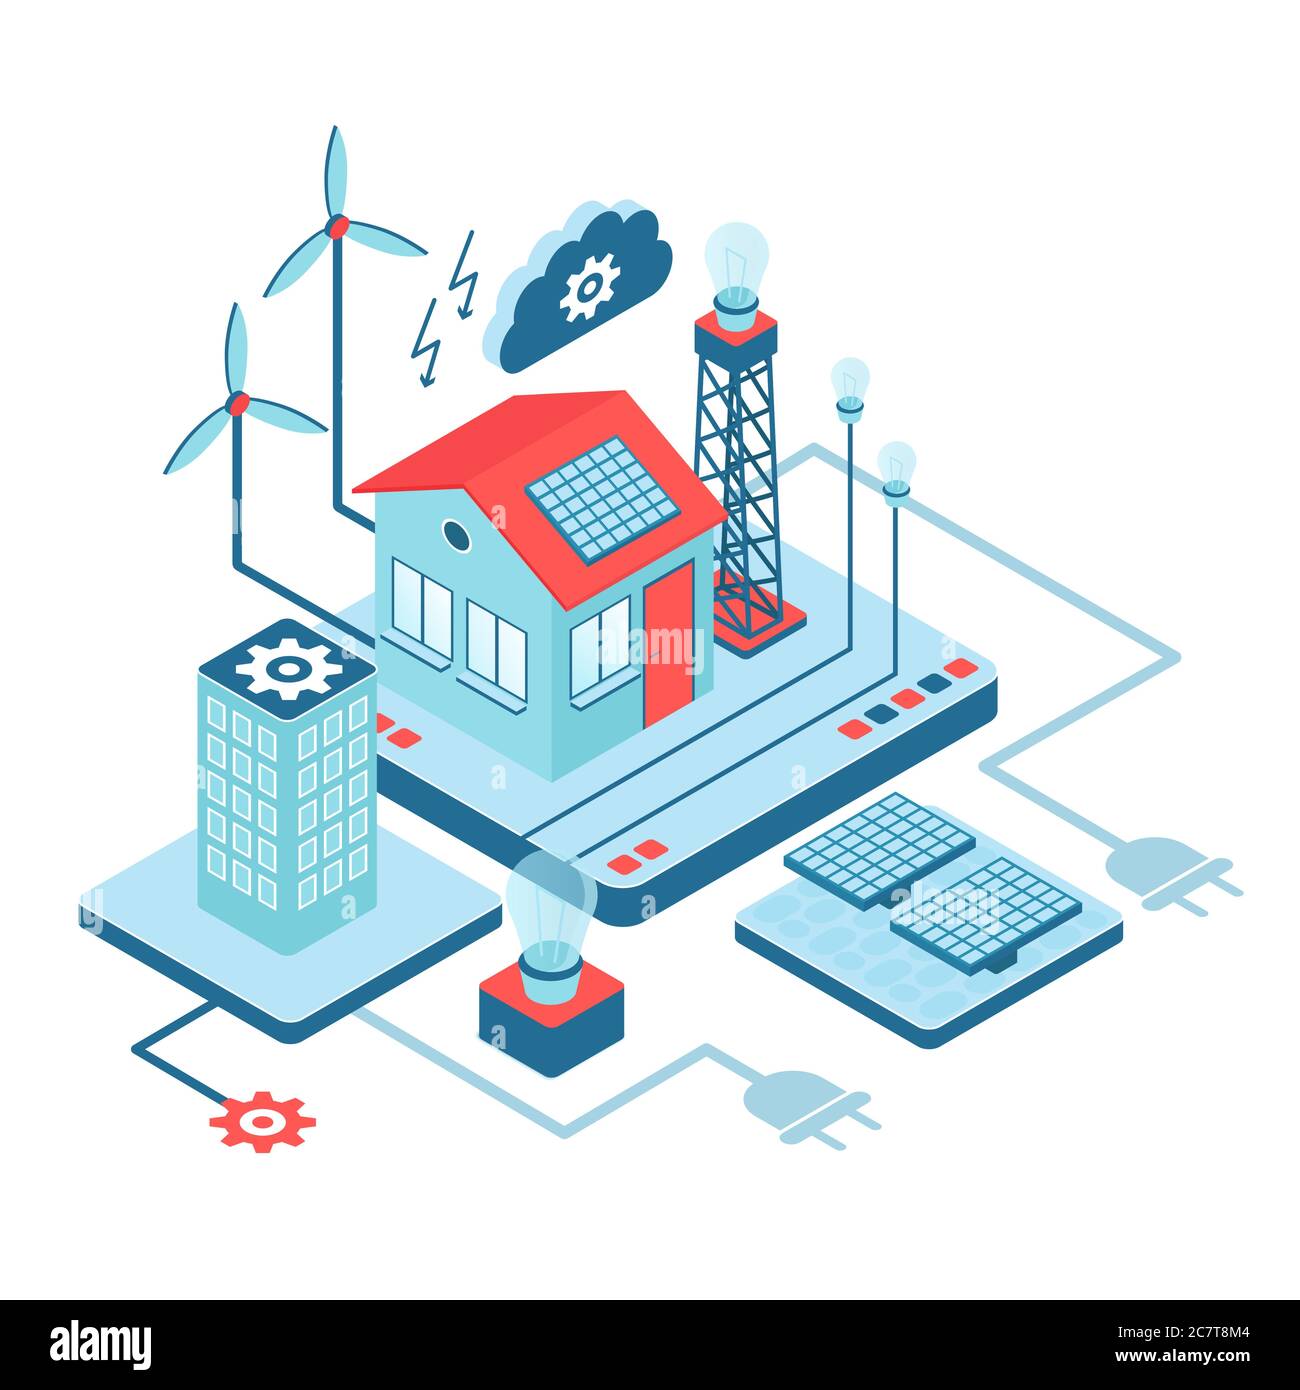 Smart home isometric vector illustration. Futuristic technology. Control panel for ergonimical power usage. Automated building management. Innovative house cartoon conceptual design element Stock Vector